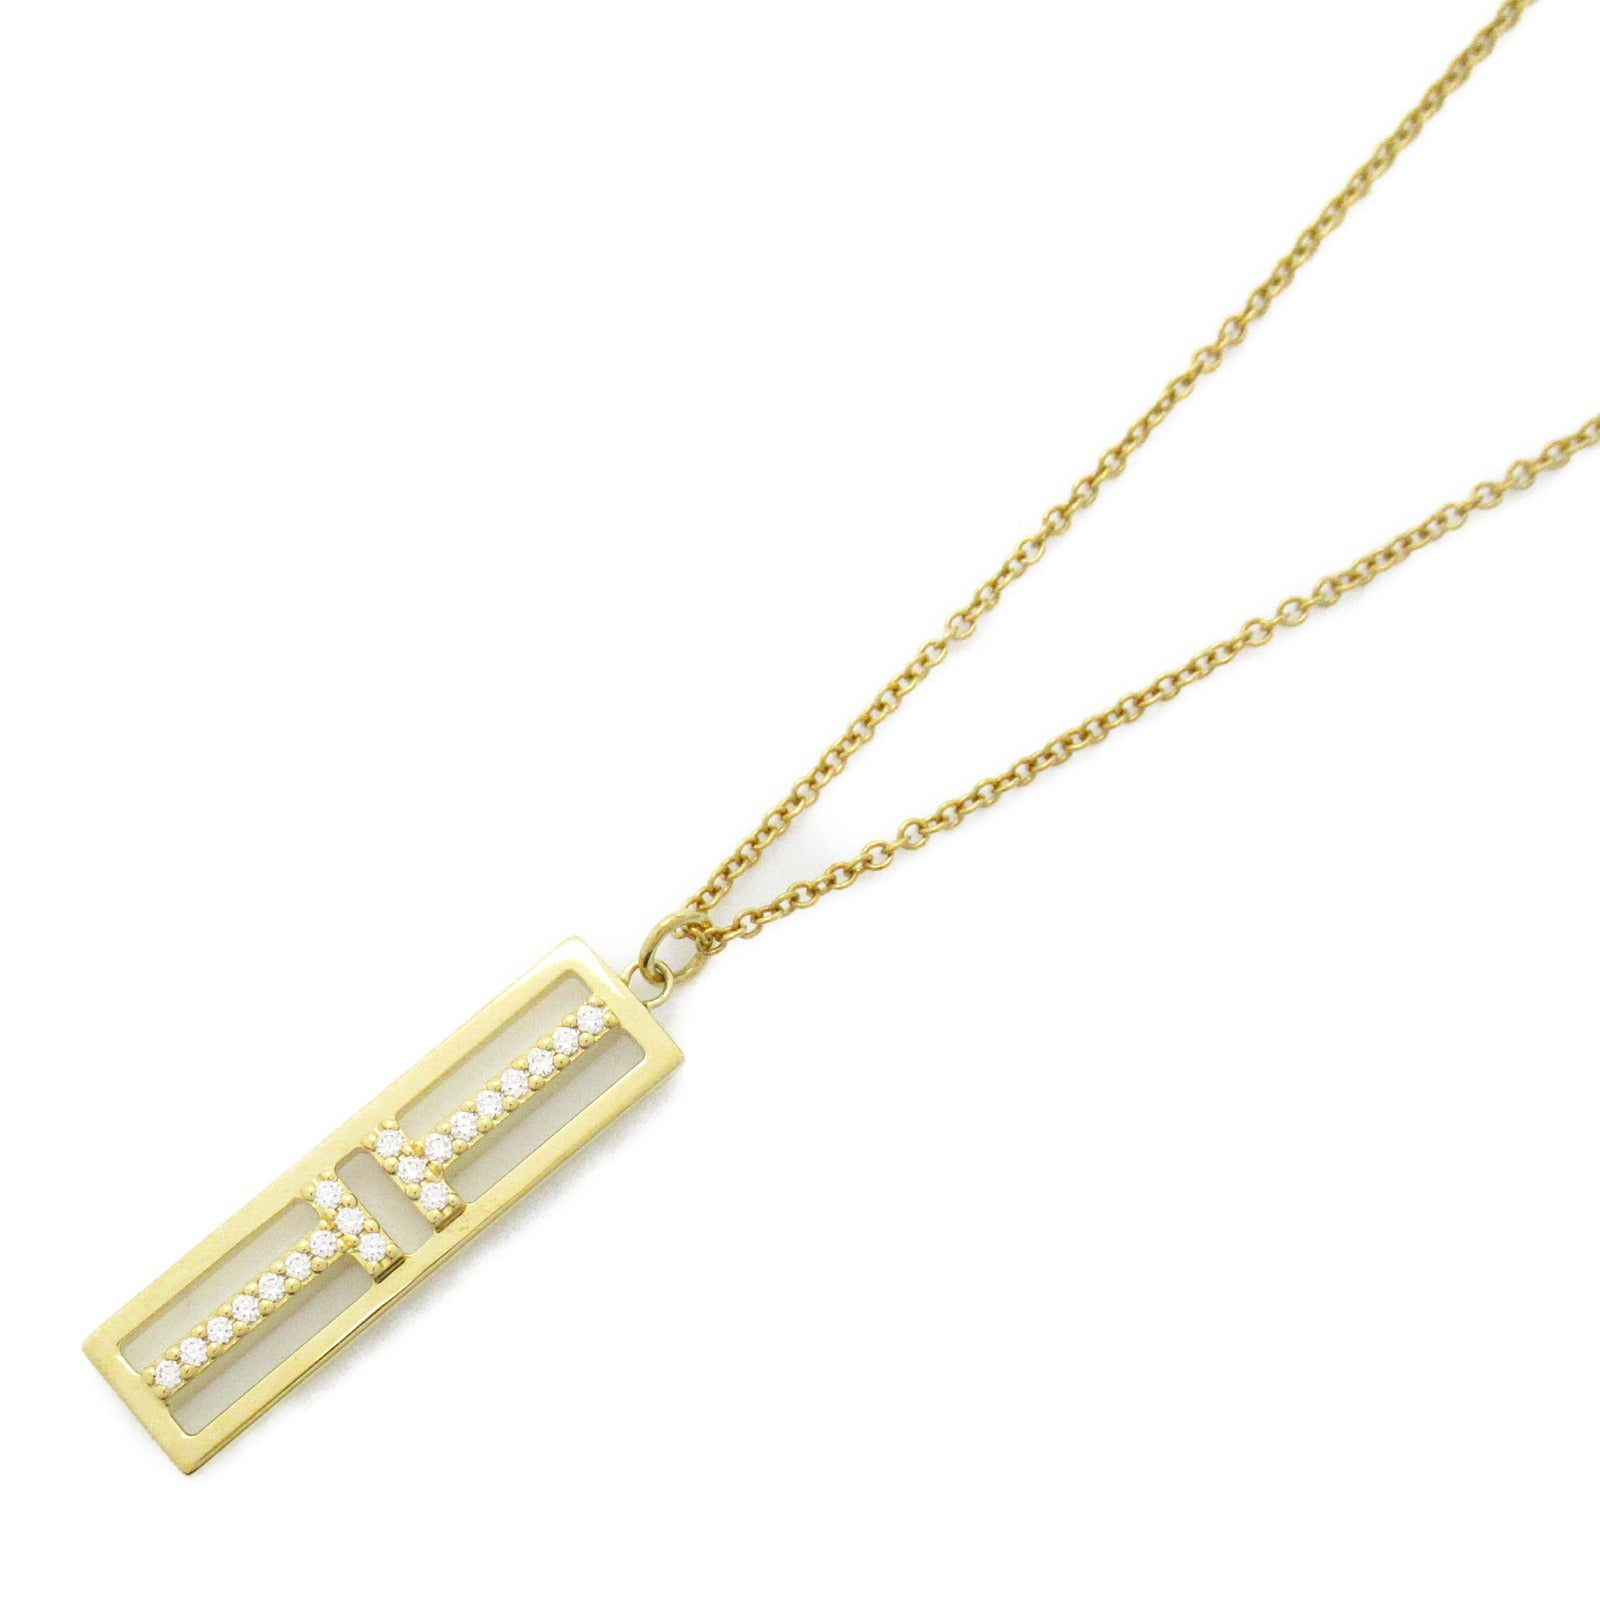 TIFFANY&CO TWO TWO Open Bartical Bar Diamond Necklace Collar K18 (Yellow G) Diamond  Clearance